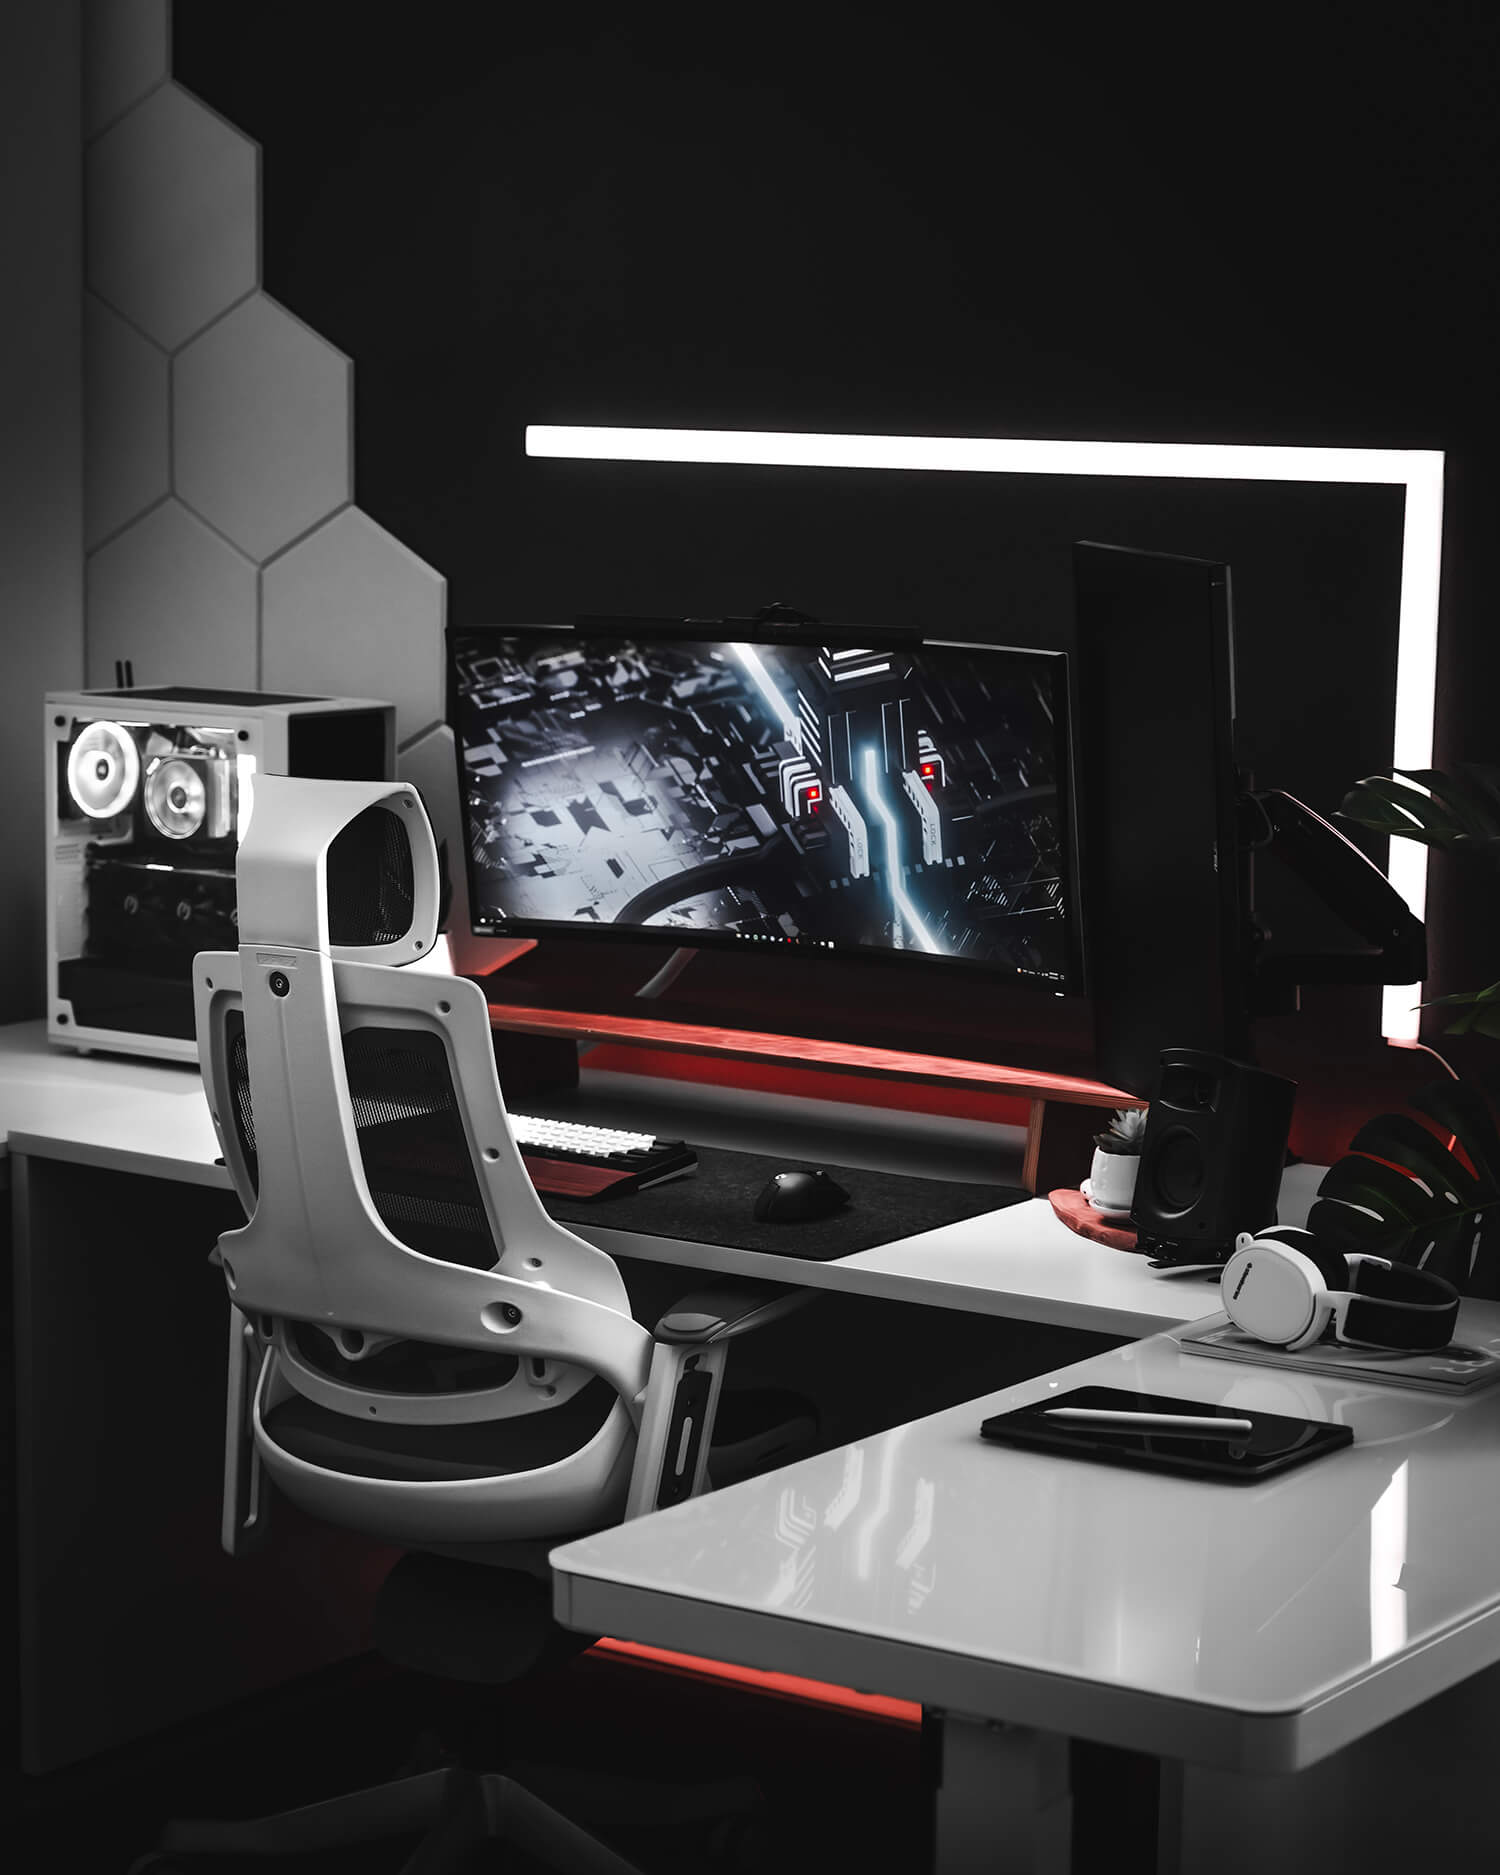 Build the Best Multi-Monitor Setups for Gaming and StreamingBuild